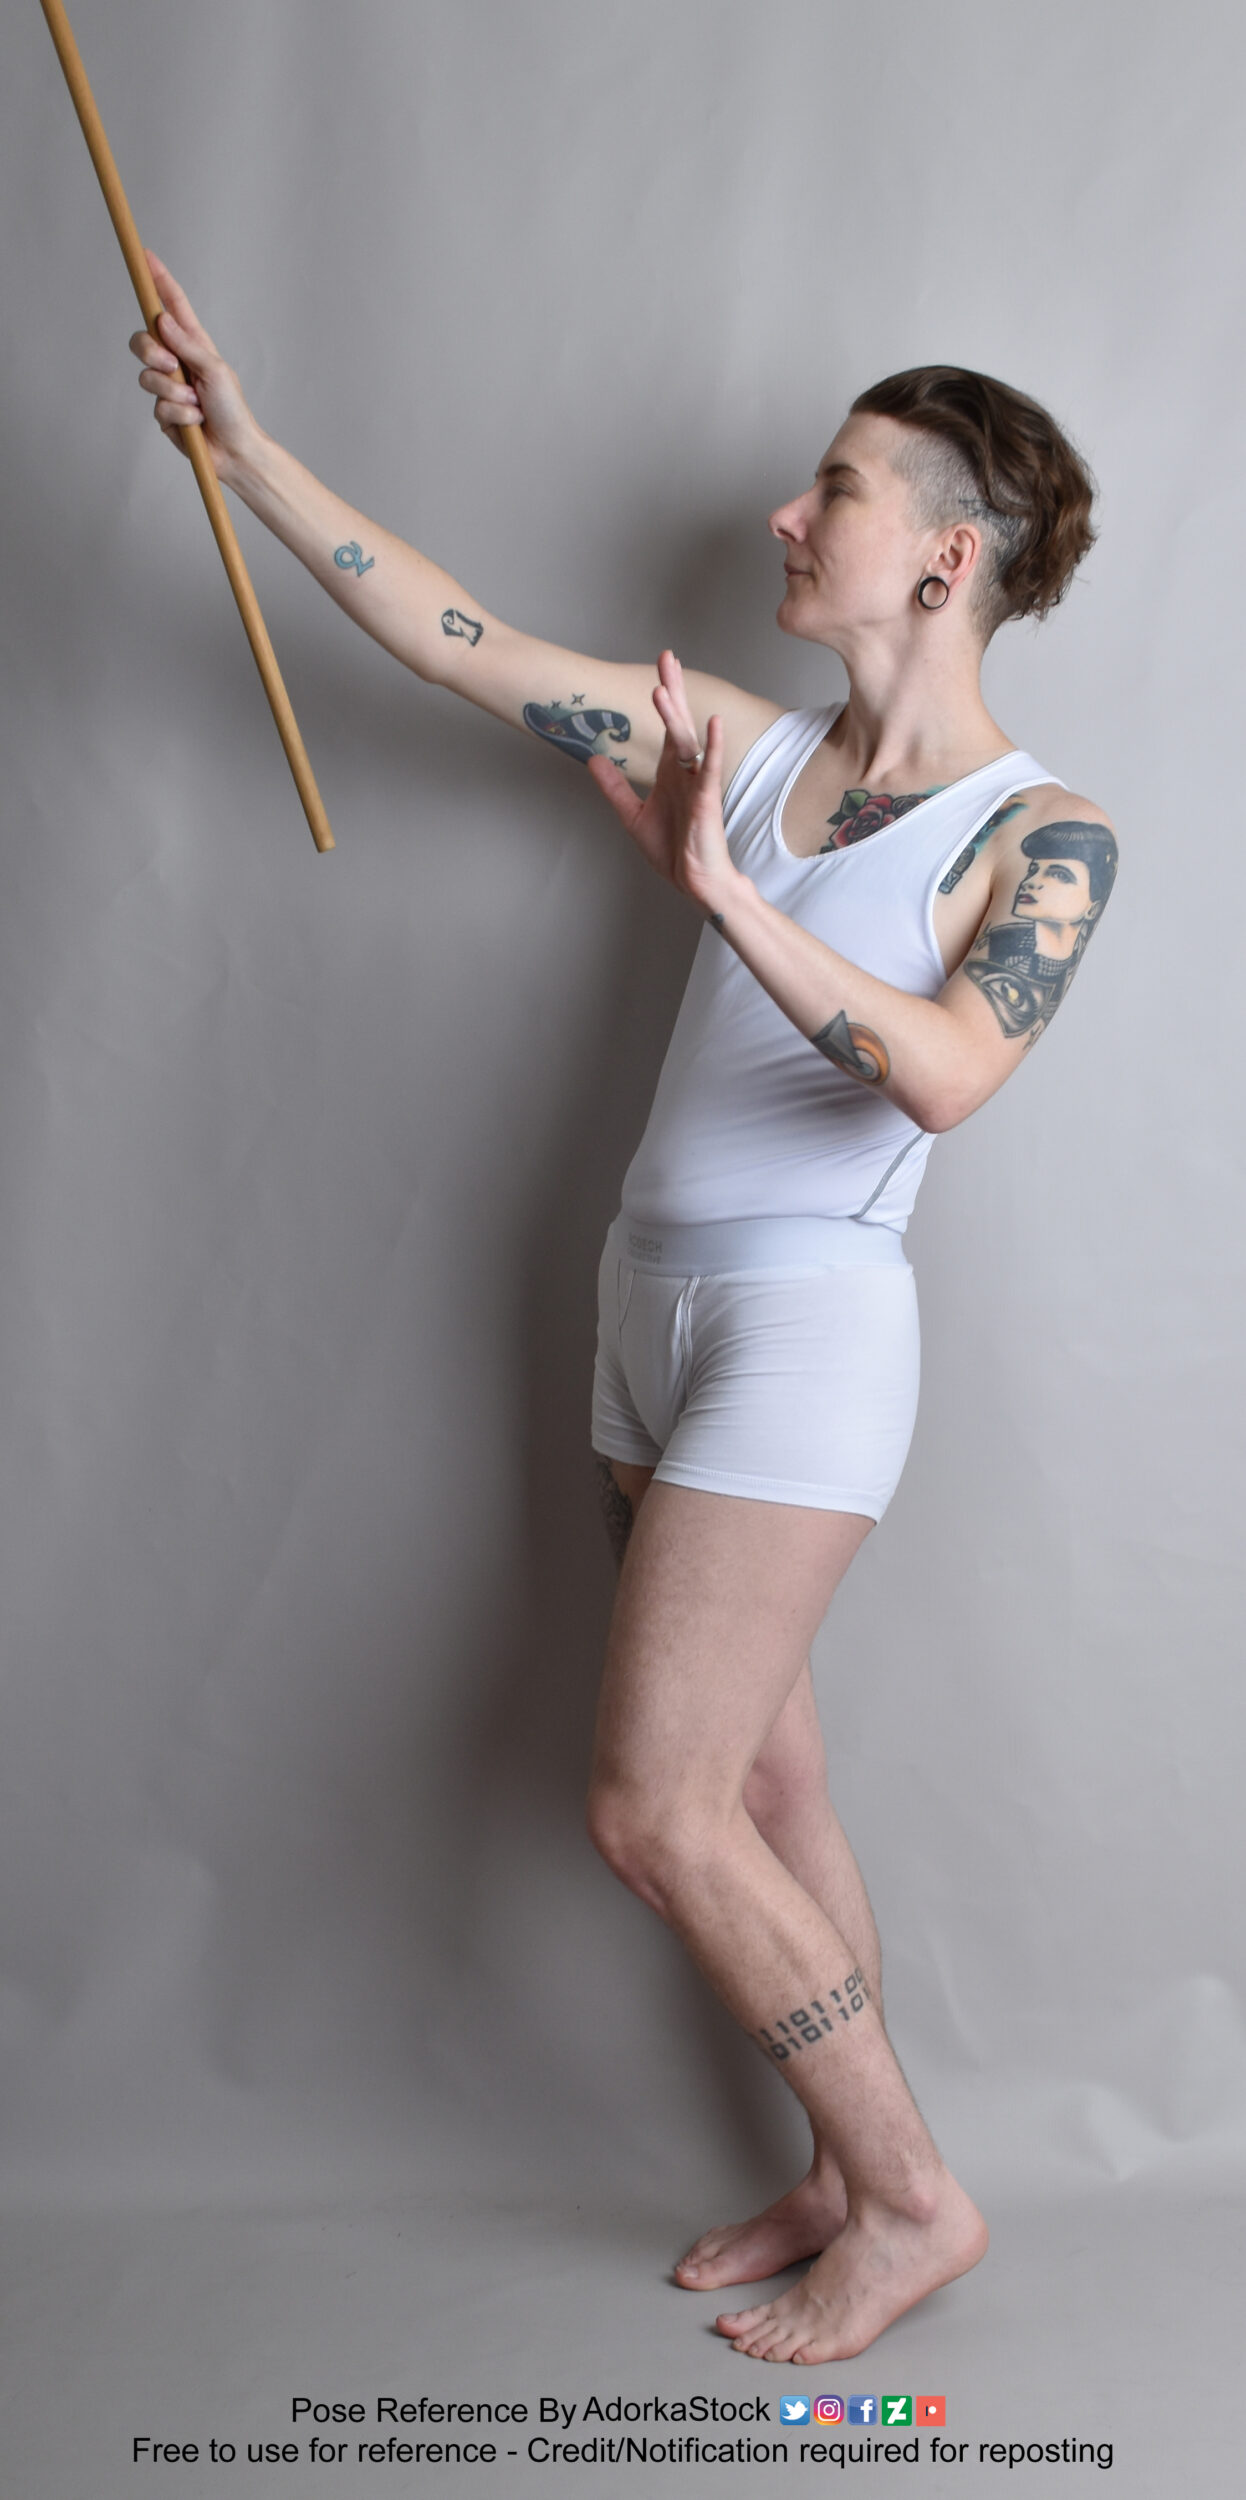 Thin, white, nonbinary pose reference model in standing profile pose with stick raised as if casting a spell, the other hand open.